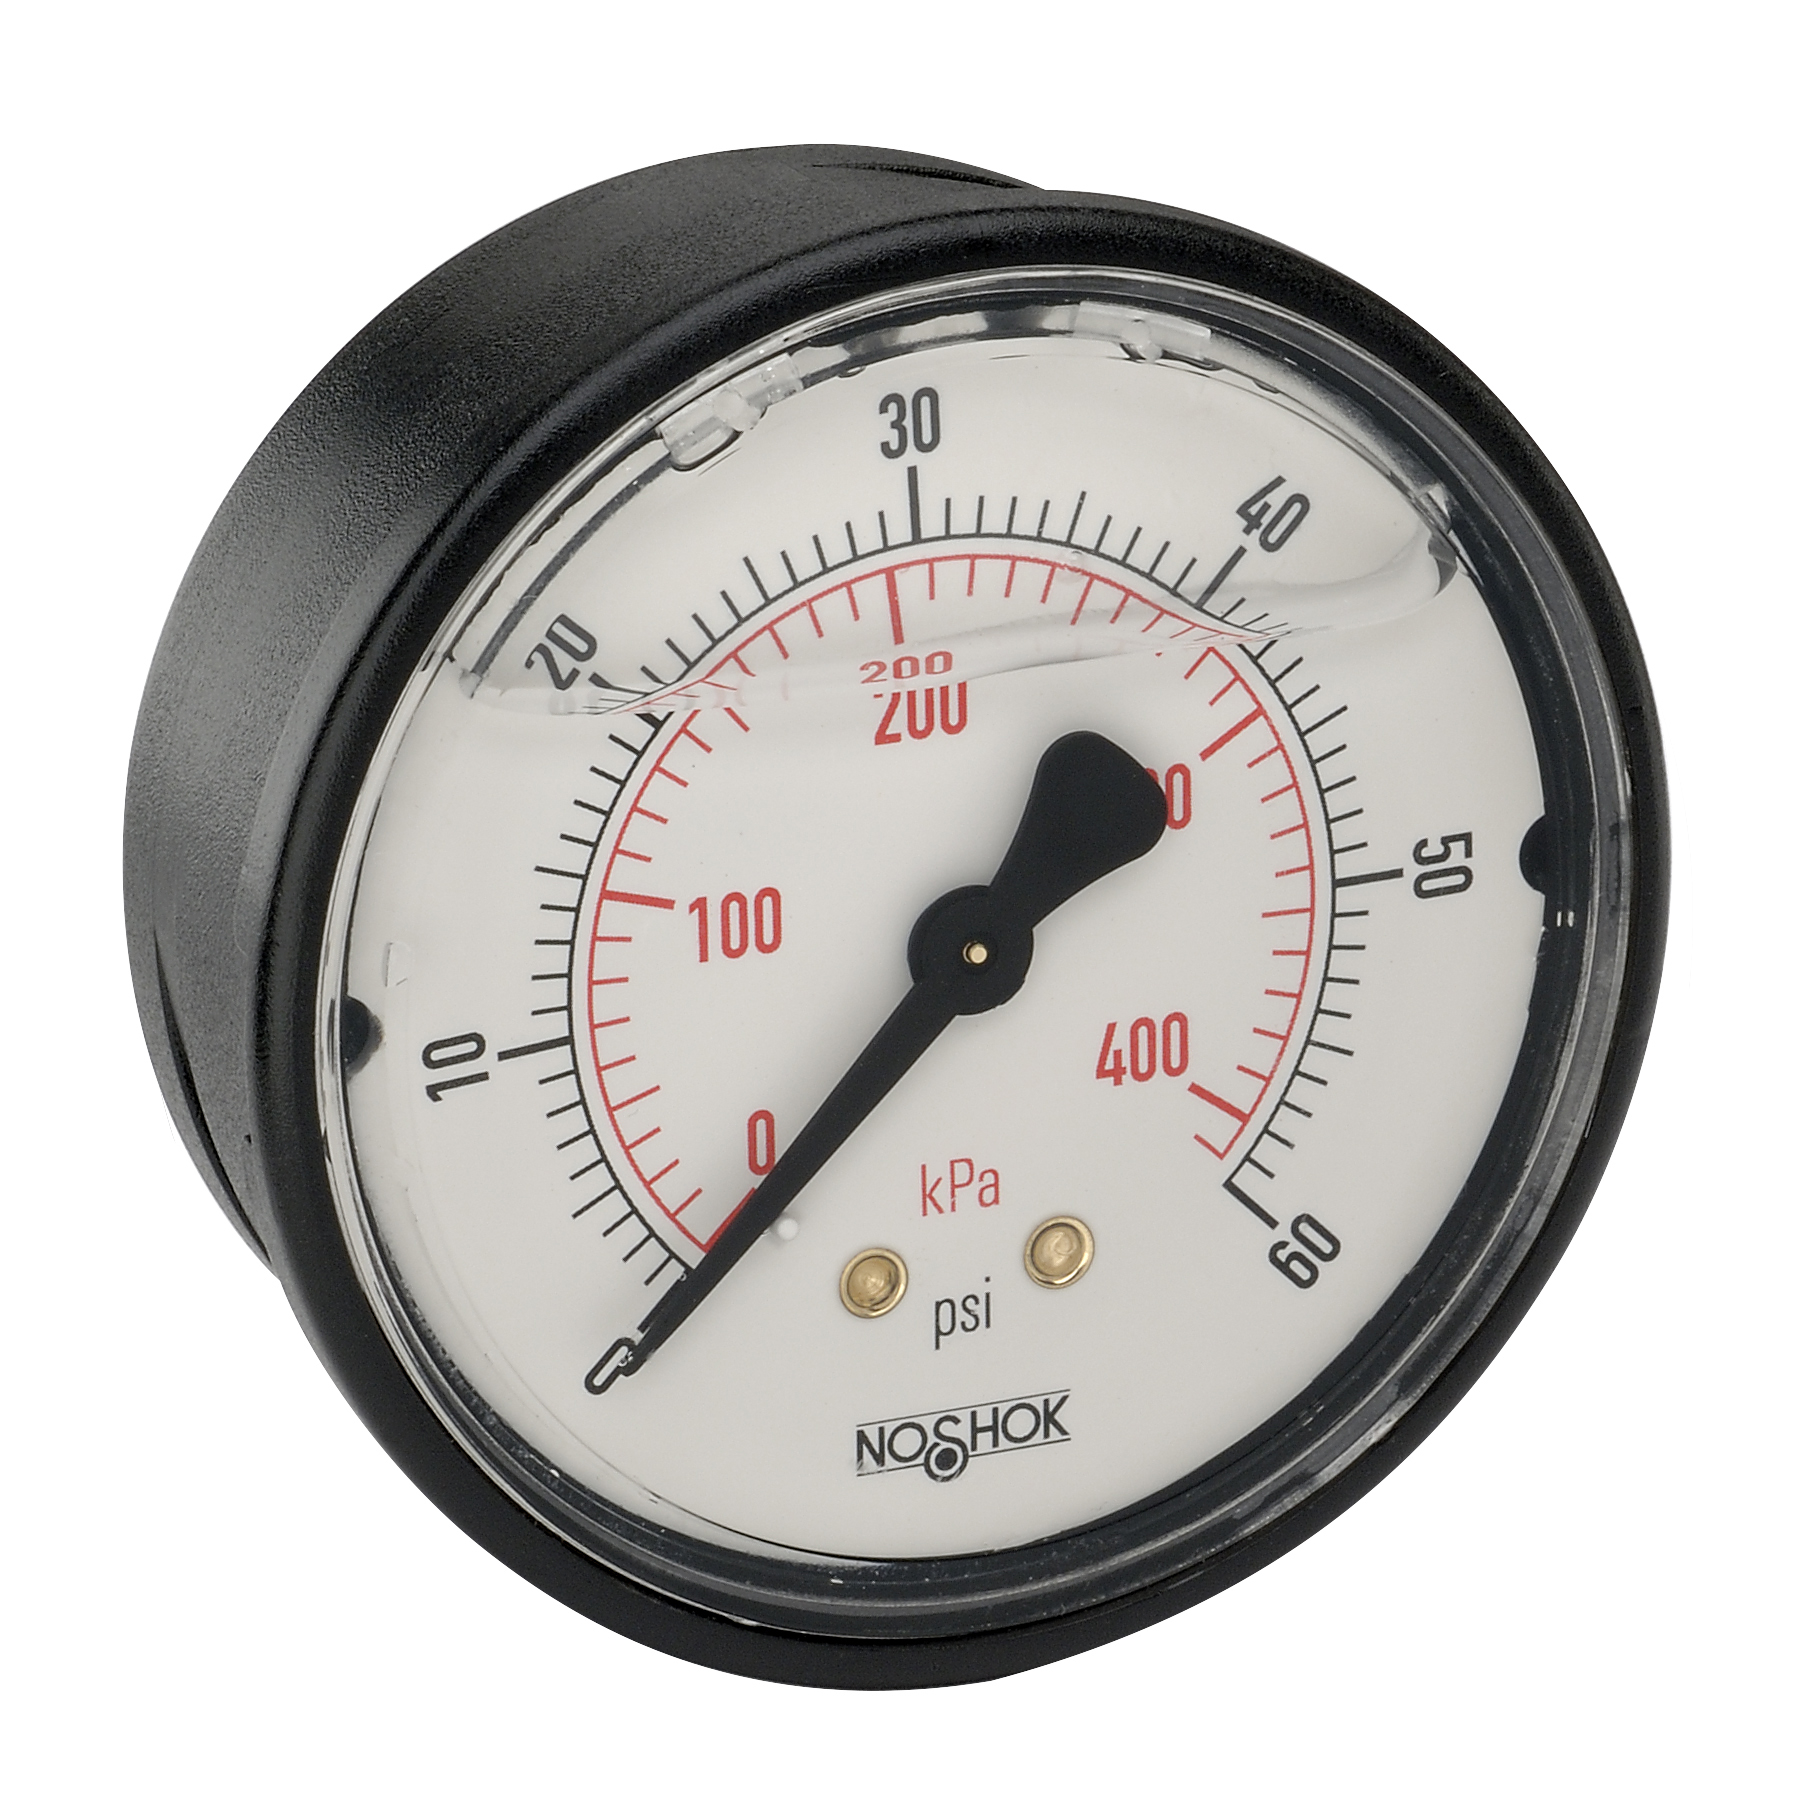 25-910-600-psi/kPa-PMC 900 Series ABS and Stainless Steel Liquid Filled Pressure Gauges